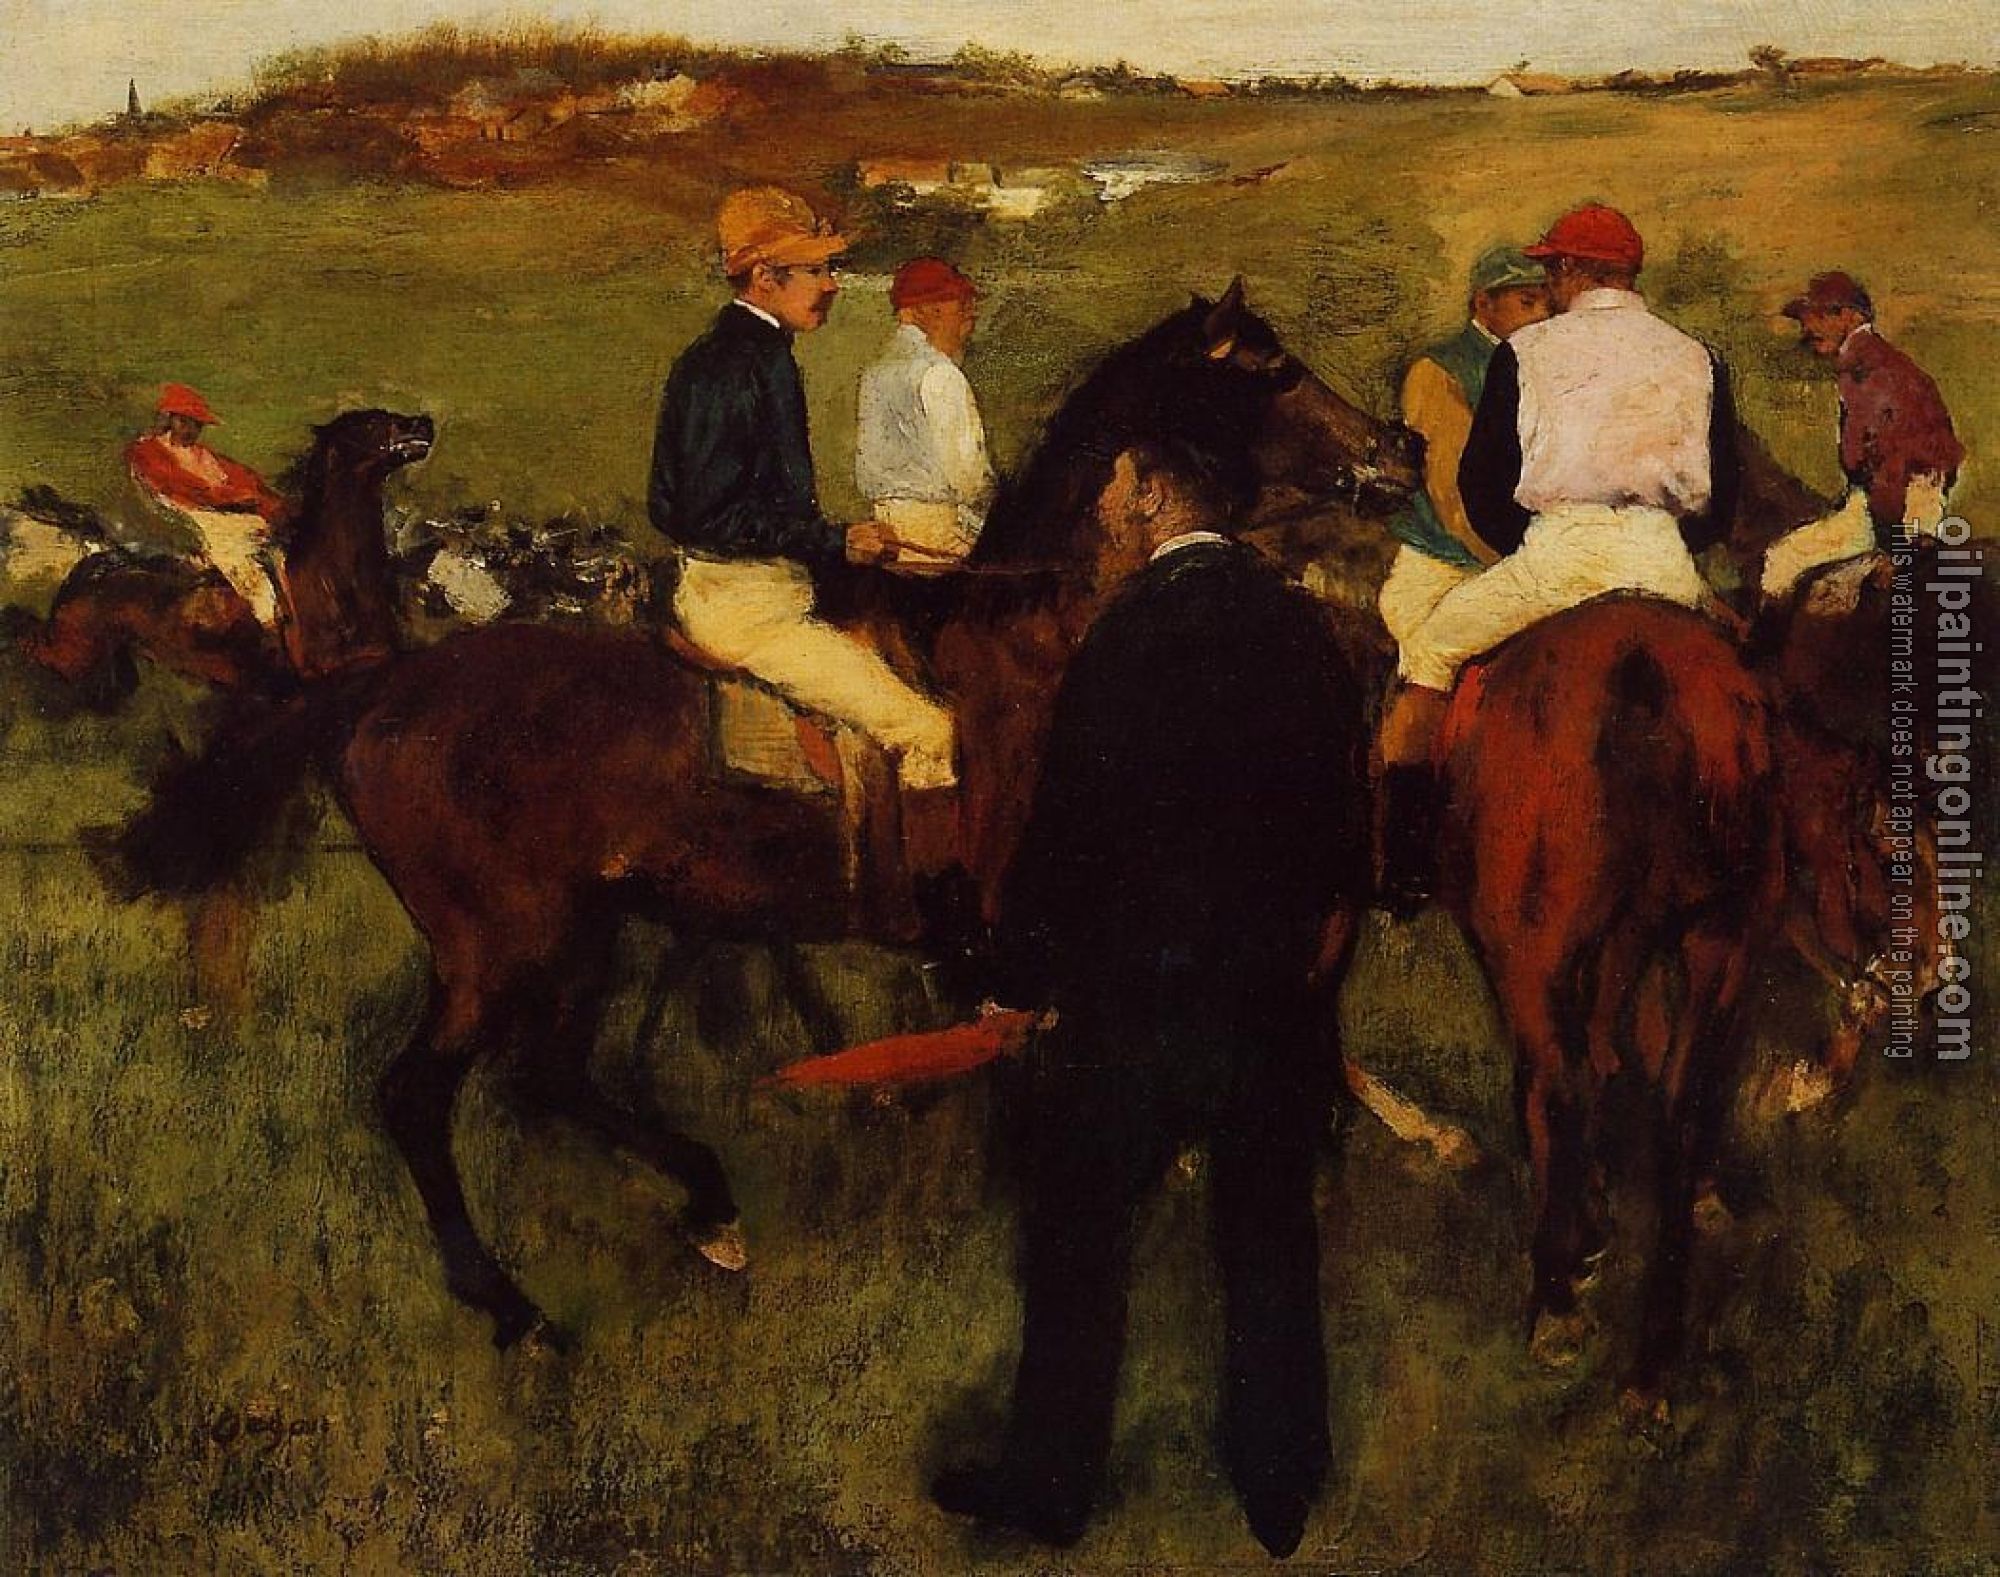 Degas, Edgar - Out of the Paddock